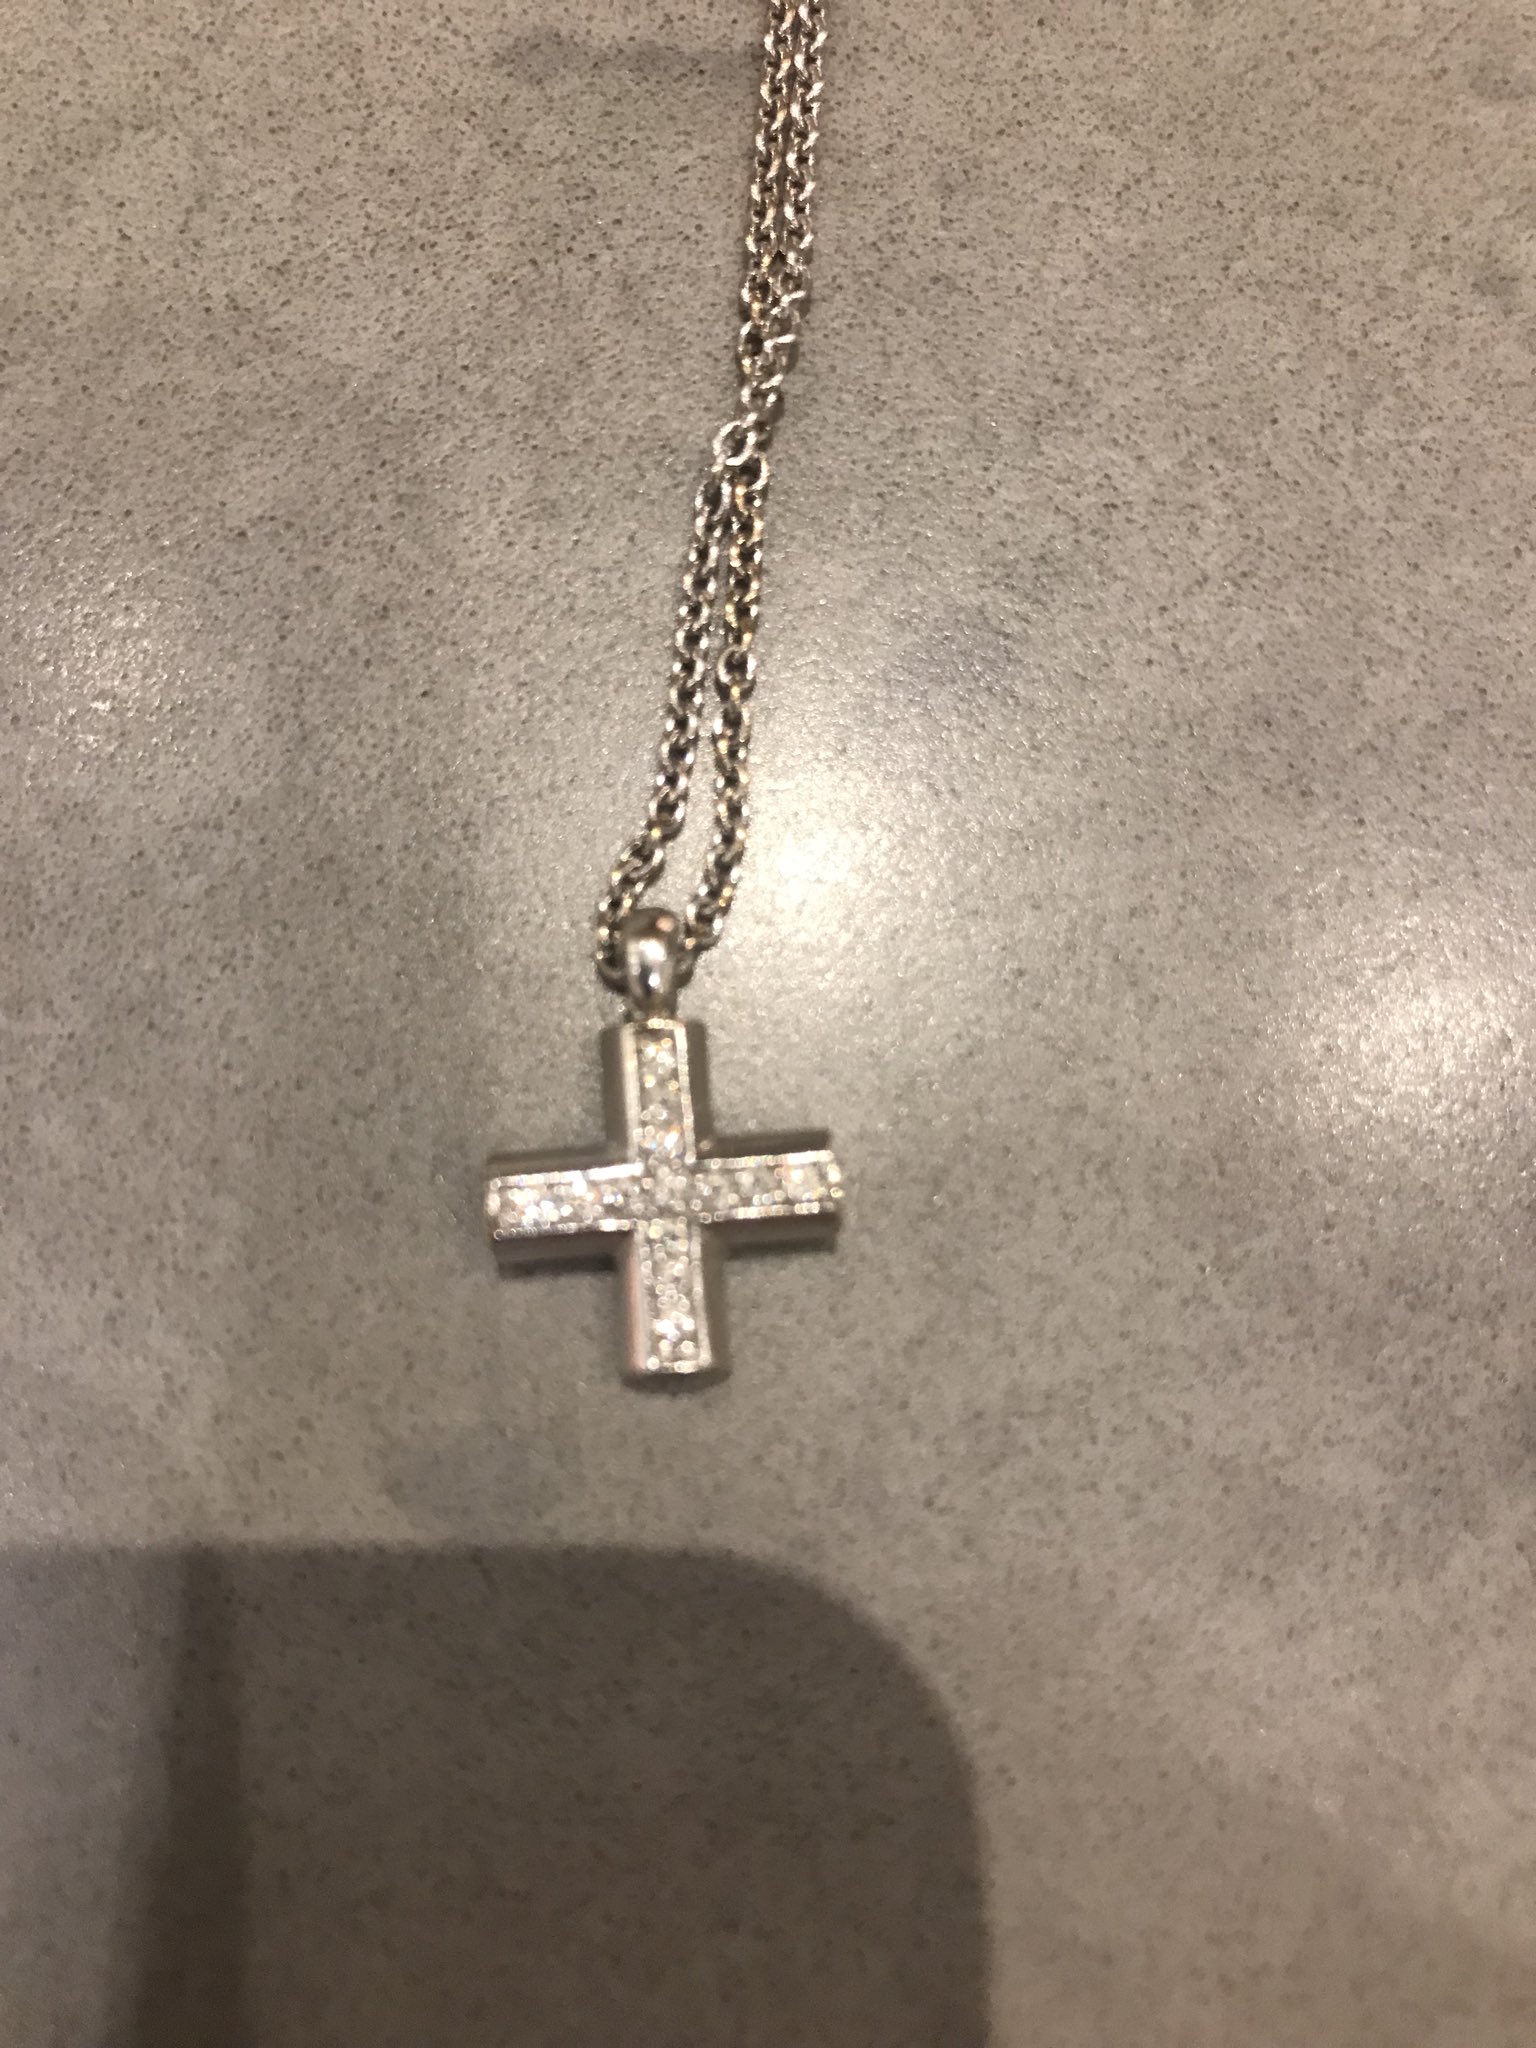 Iced Out Hip Hop Pass Tester Moissanite Cross Pendant With VVS Moissanite  Diamond In Gold 925 Silver From Designer1918, $97.82 | DHgate.Com